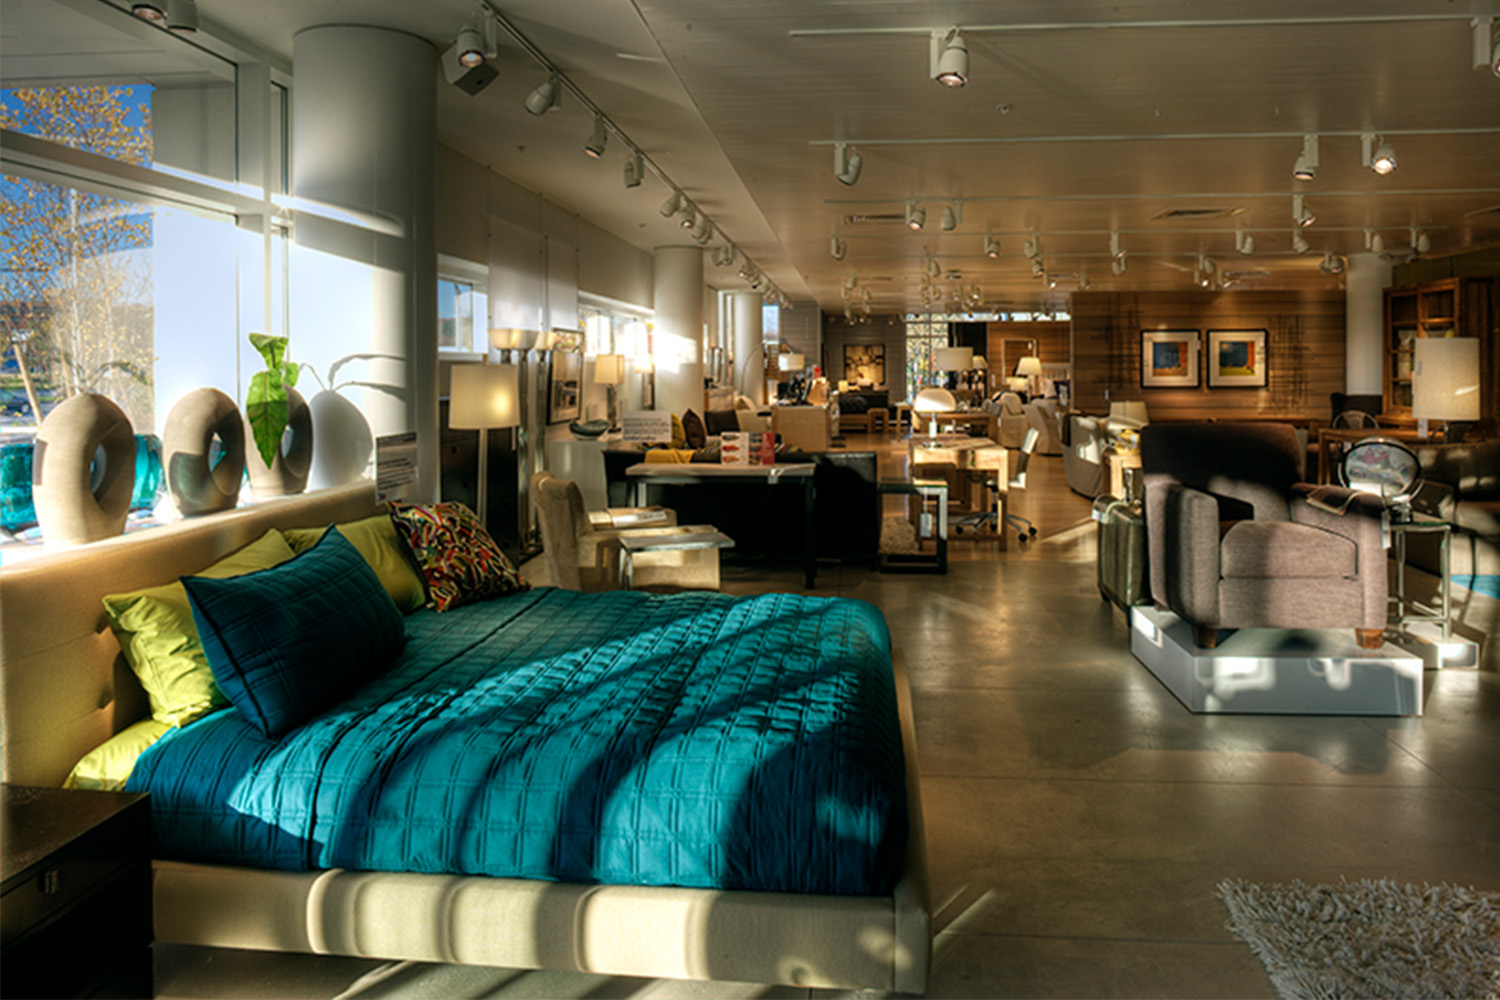 Store merchandise consisting of a bed with teal bedsheets, artistic vases, a brown chair, a couch, etc. 